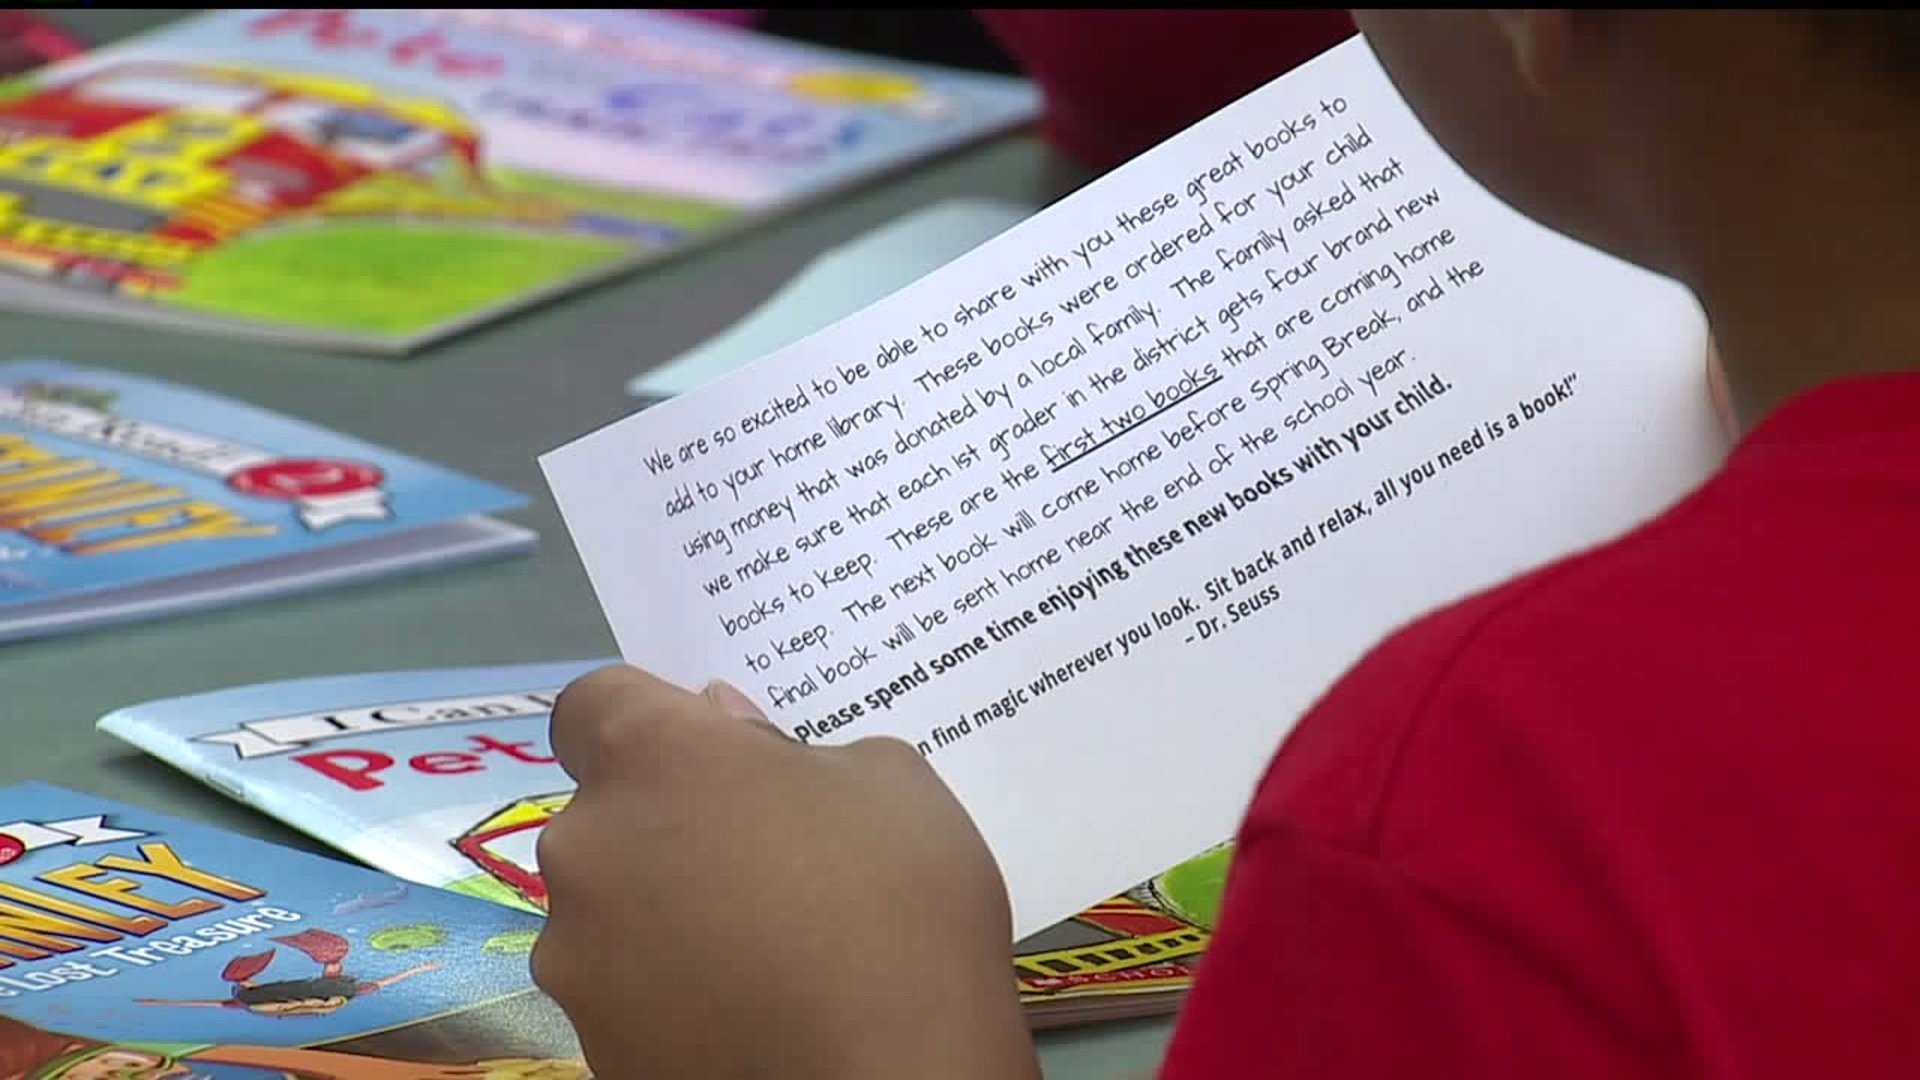 Local first graders get book donation